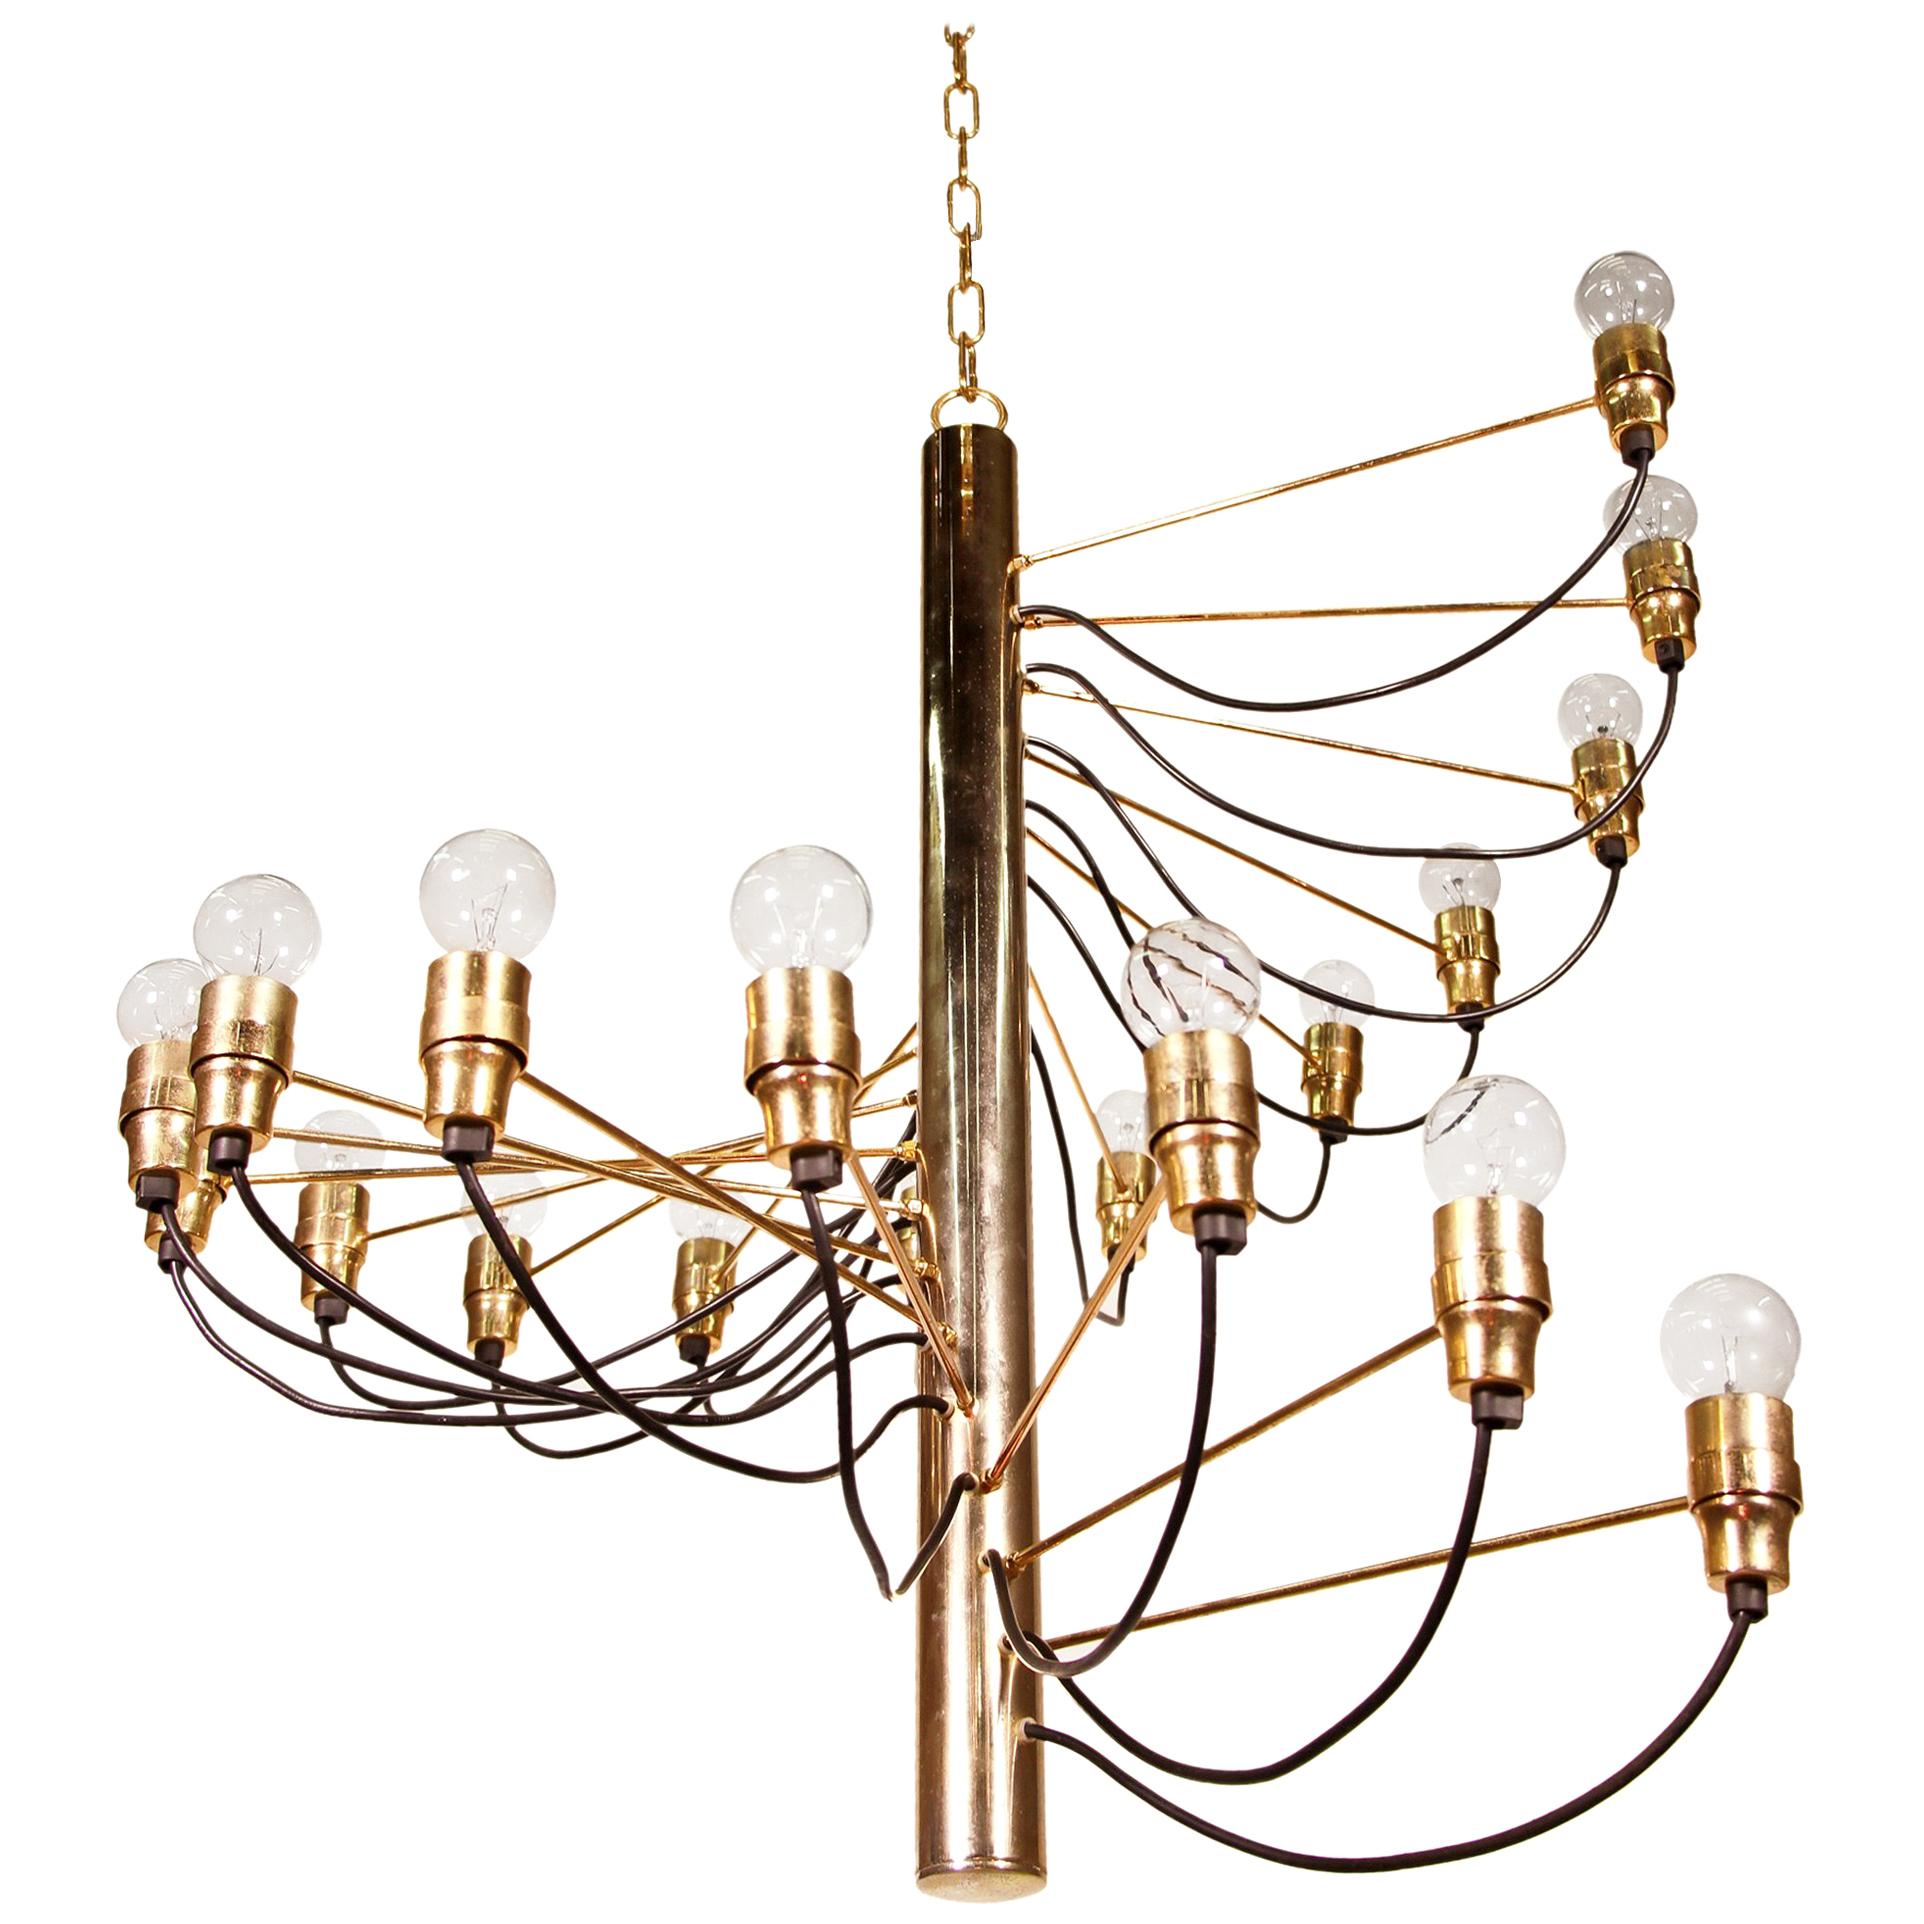 Spiral Brass Chandelier Designed in Italy by Gino Sarfatti, 1950s For Sale